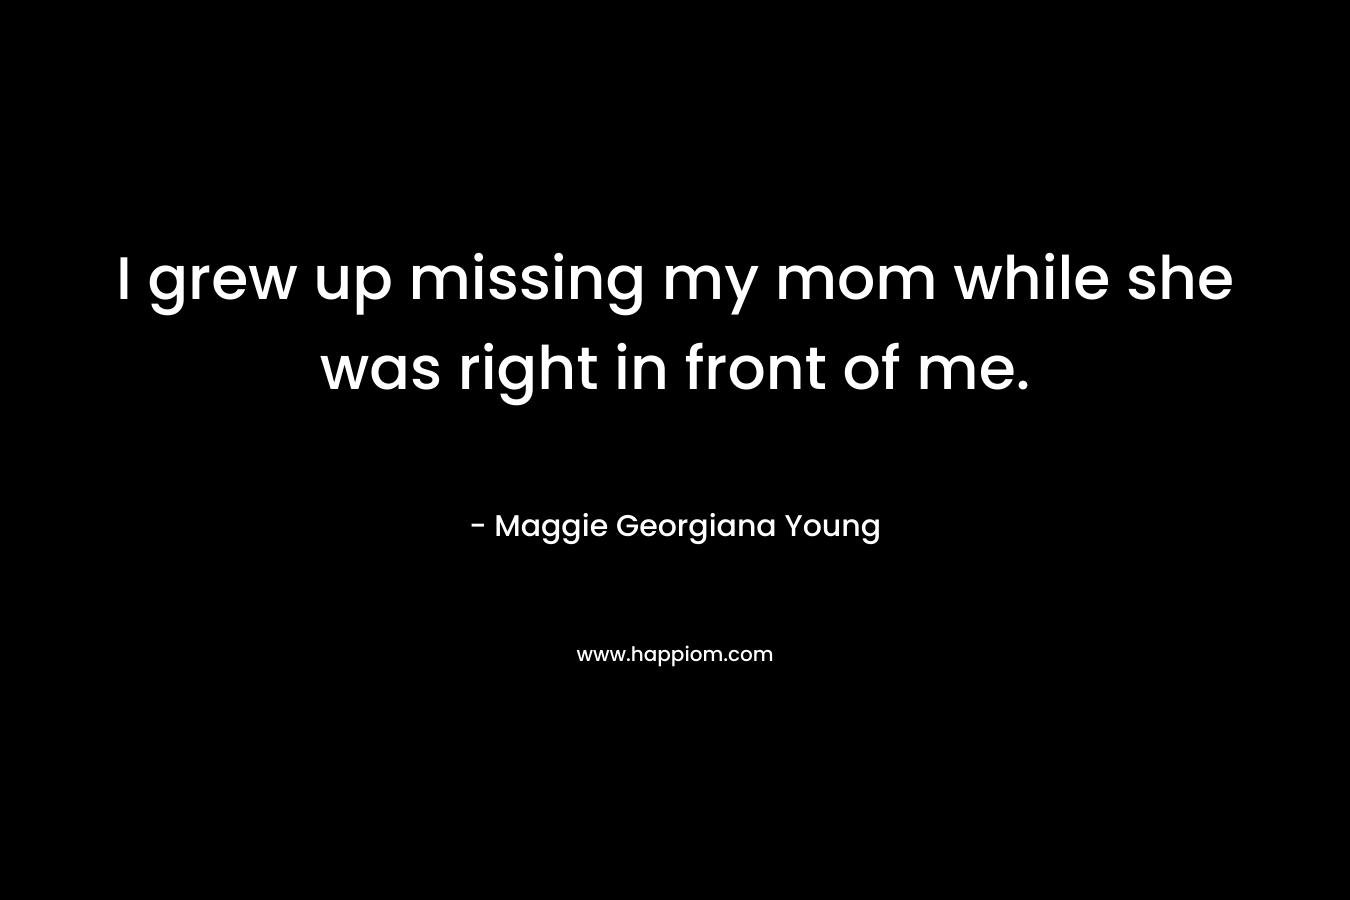 I grew up missing my mom while she was right in front of me. – Maggie Georgiana Young